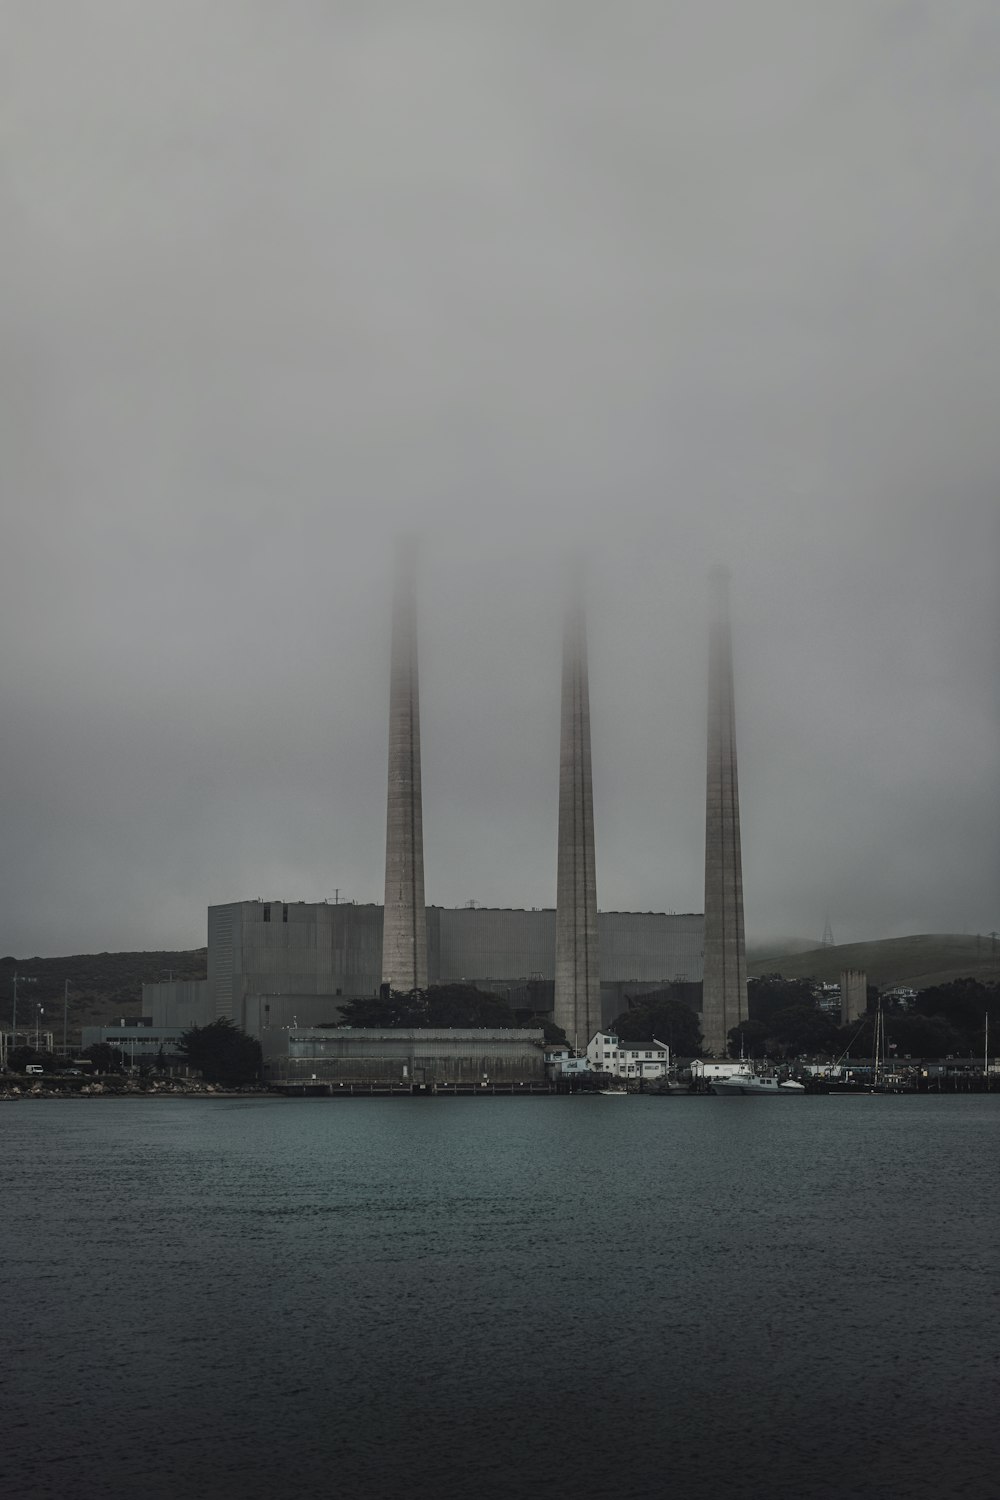 a foggy view of a power plant in the distance